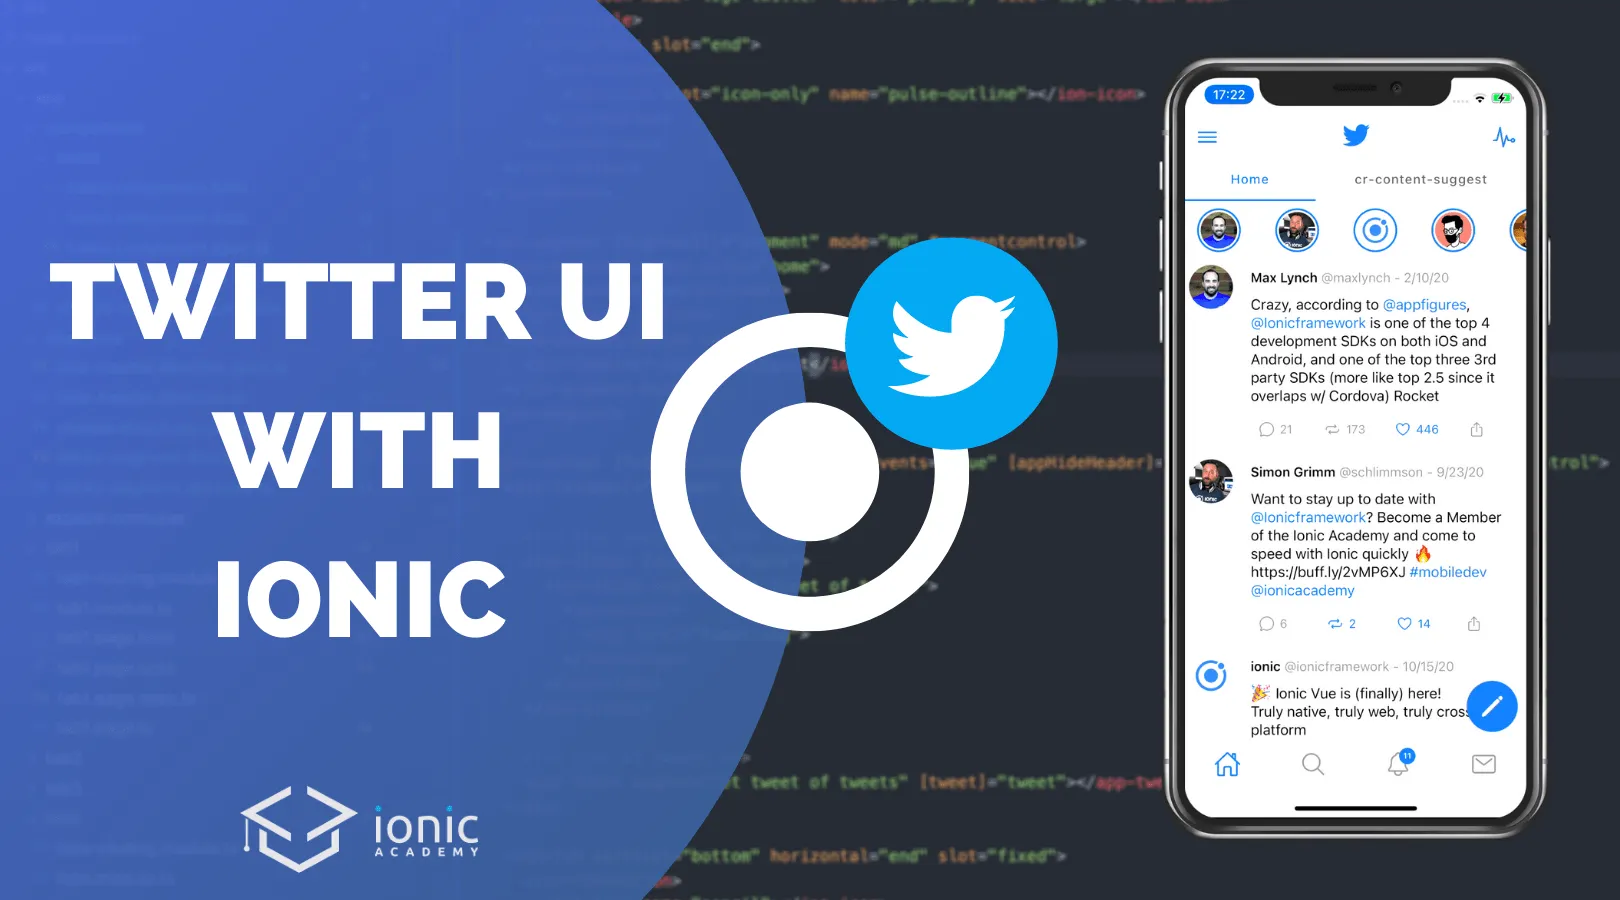 Building the Twitter UI with Ionic Components